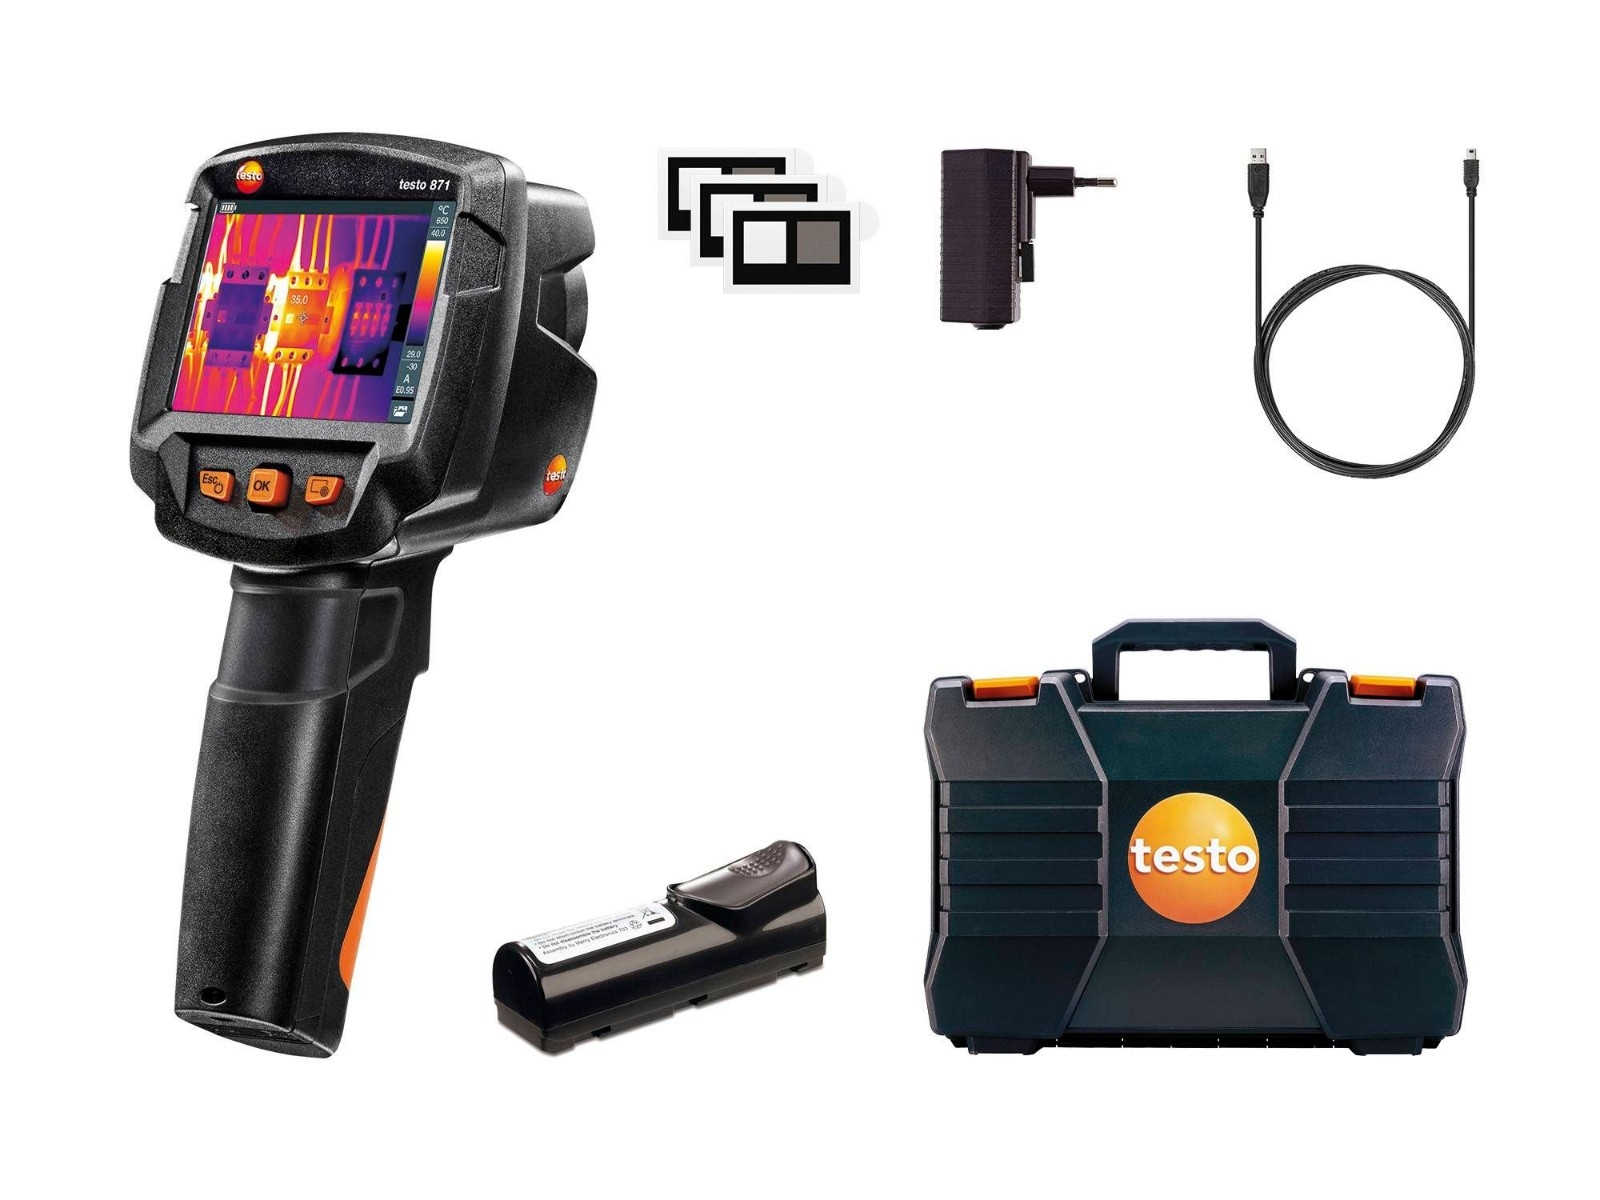 TESTO 871 Thermal Imager with App